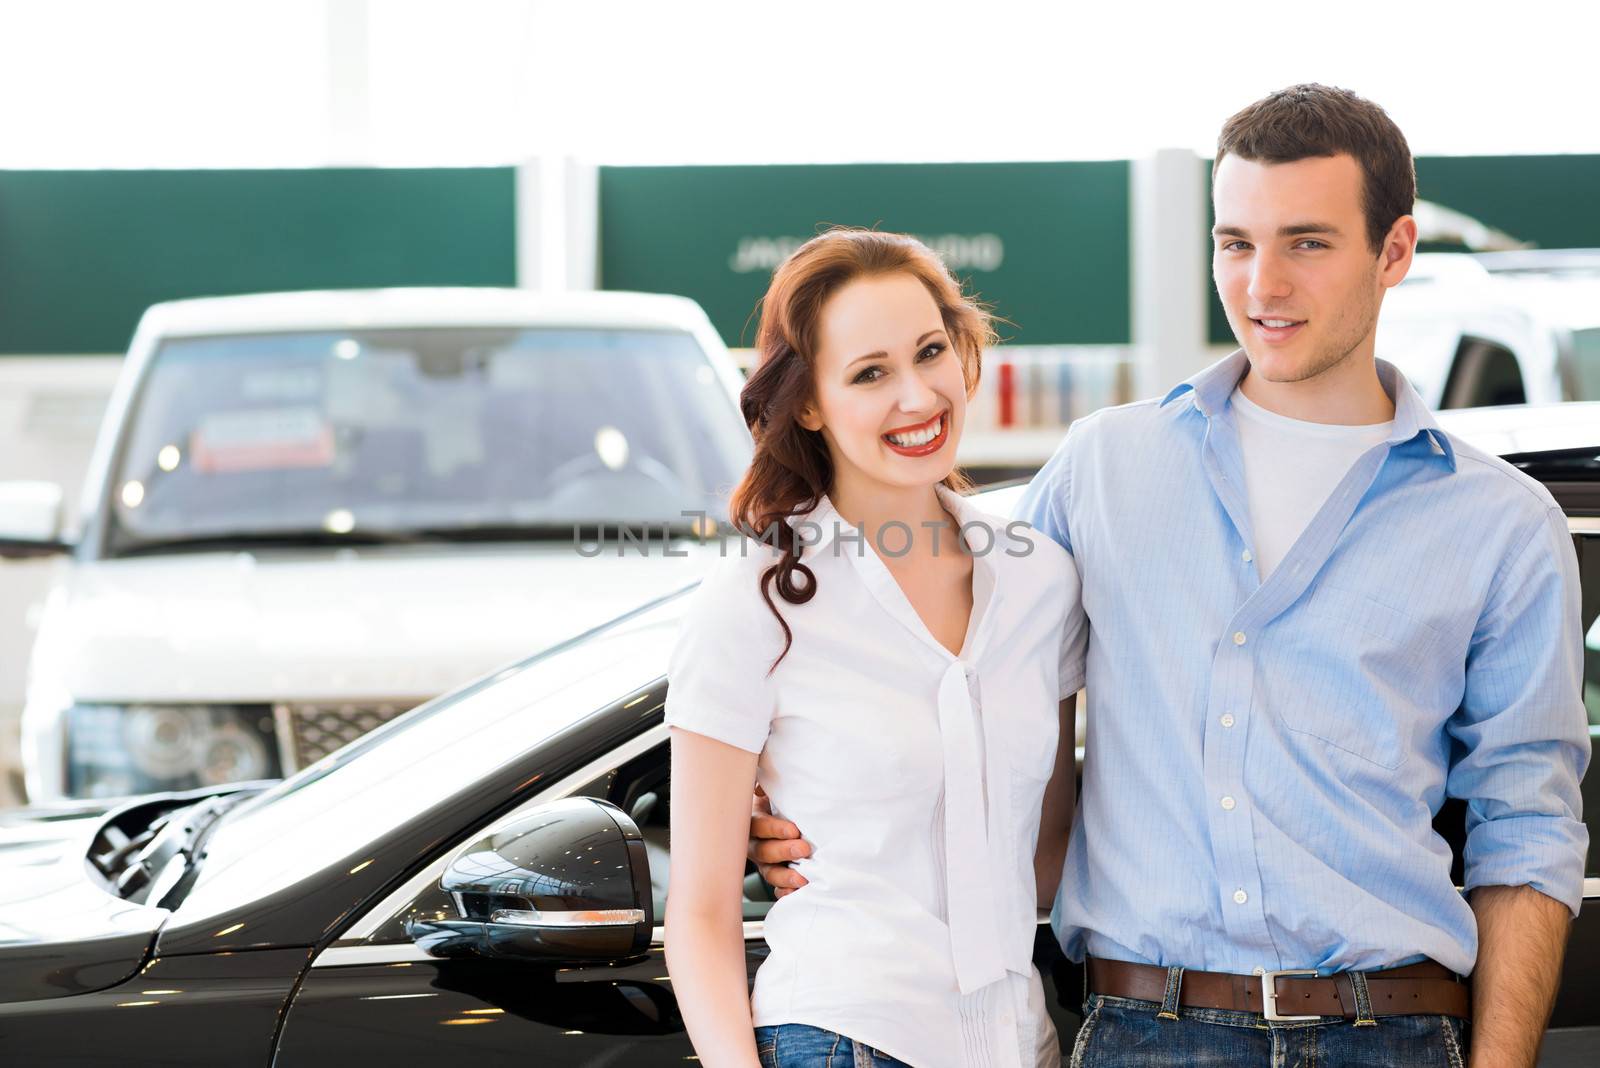 Young couple standing embracing near a car in the showroom